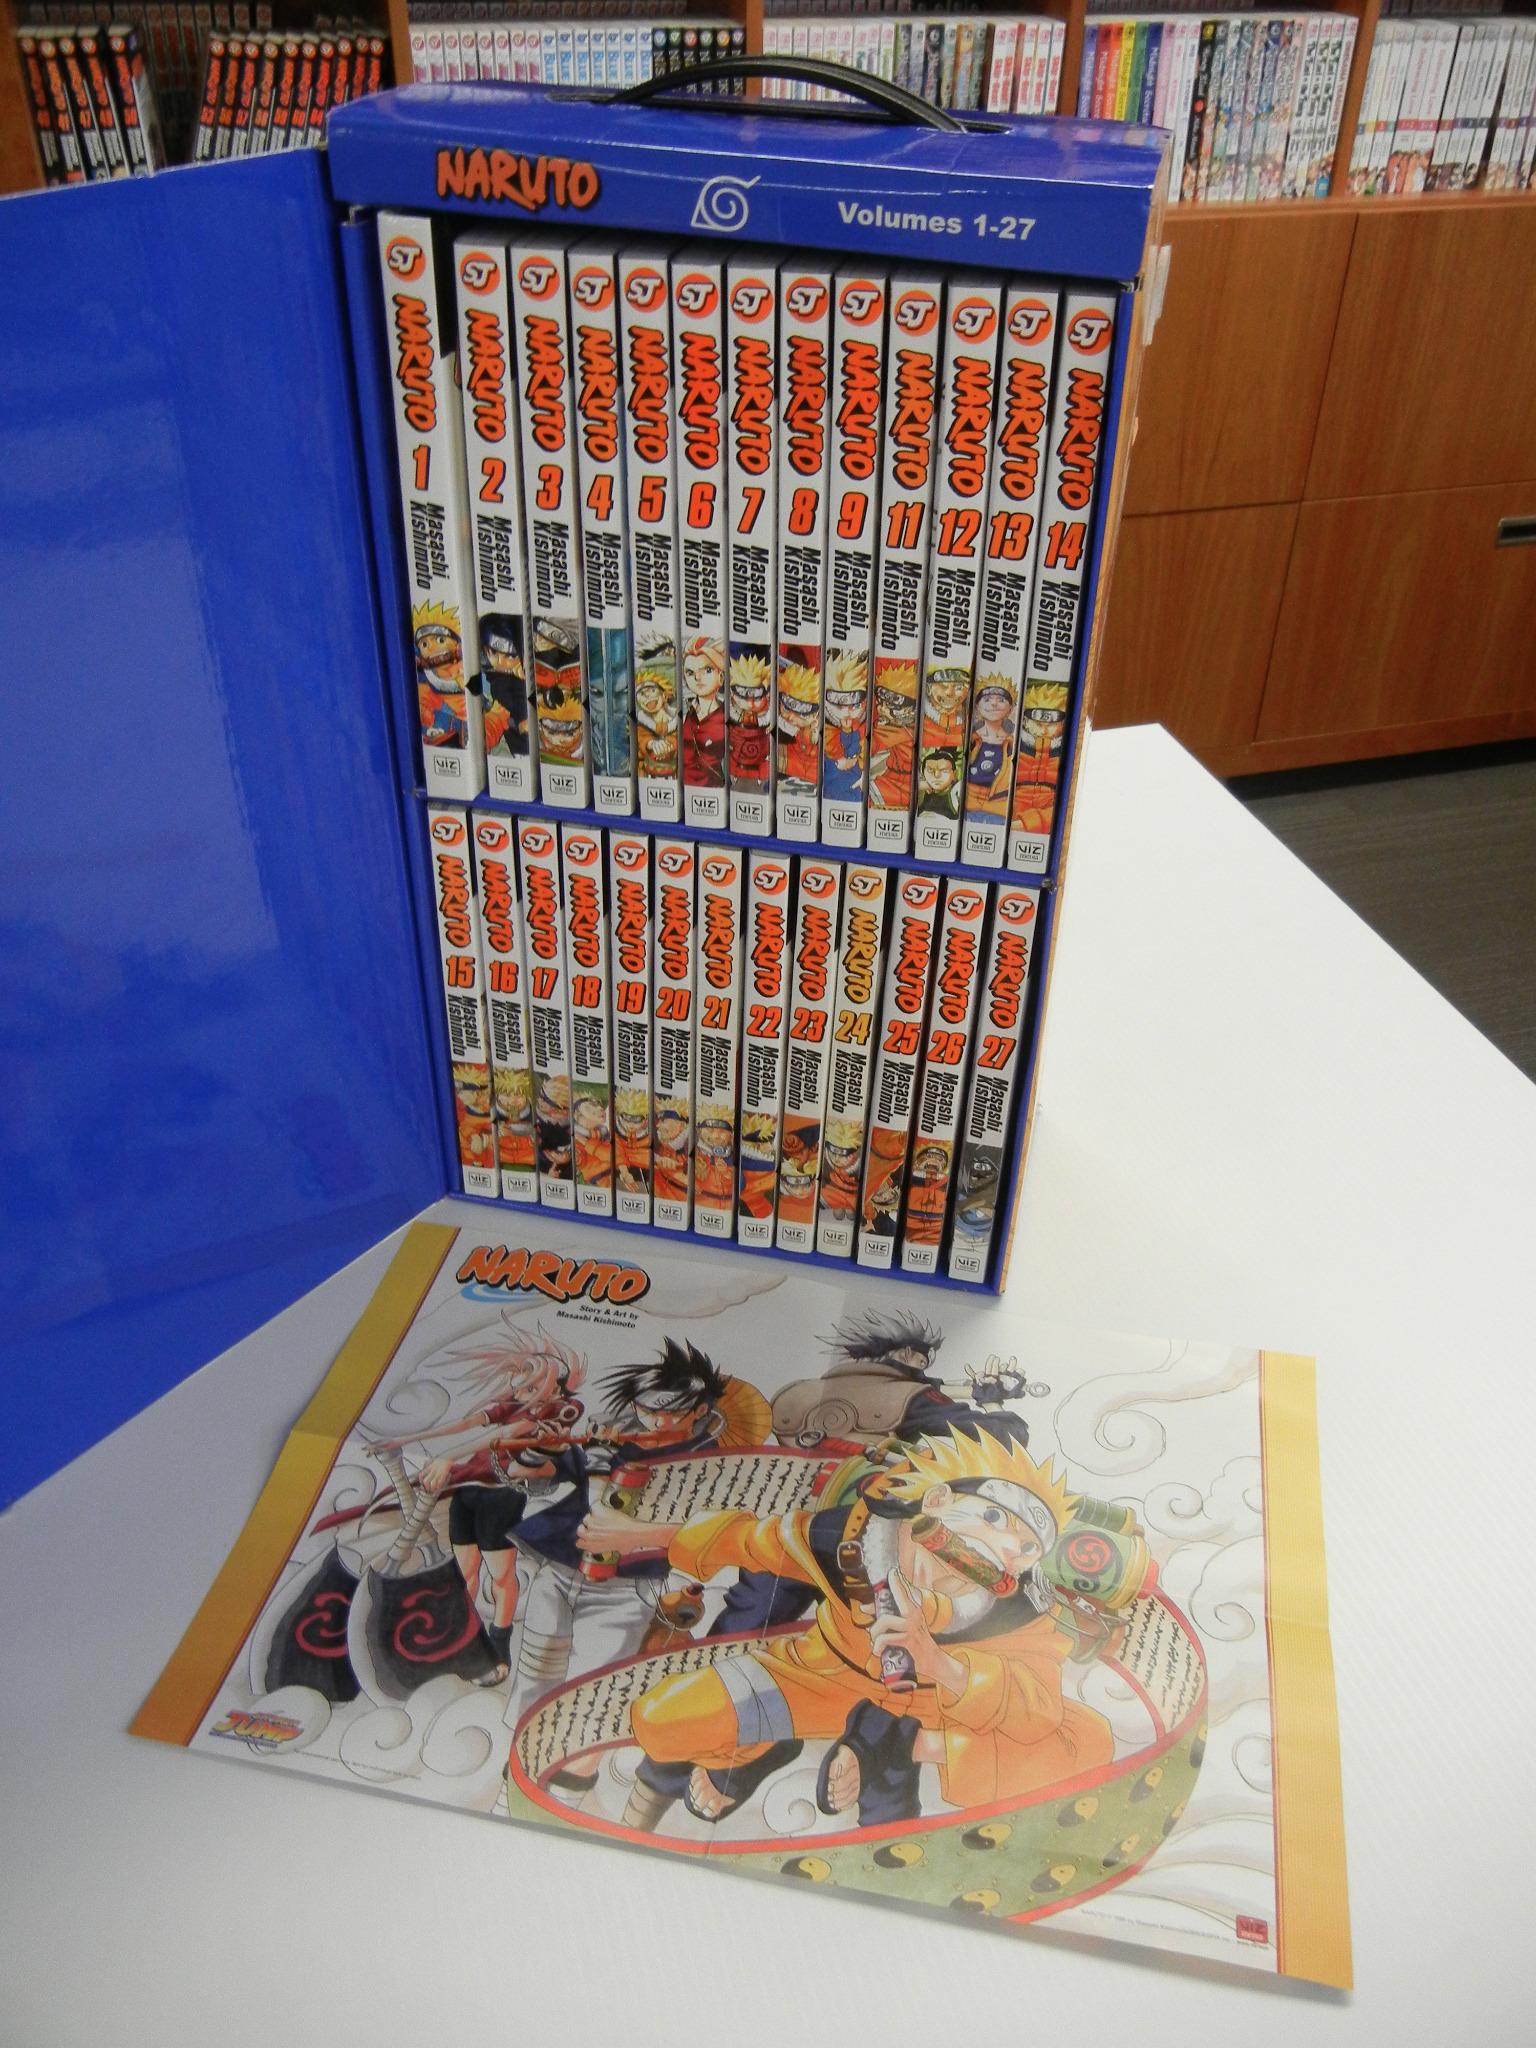 VIZ on X: Naruto and Bleach Box Set 1s are BACK IN STOCK! Order